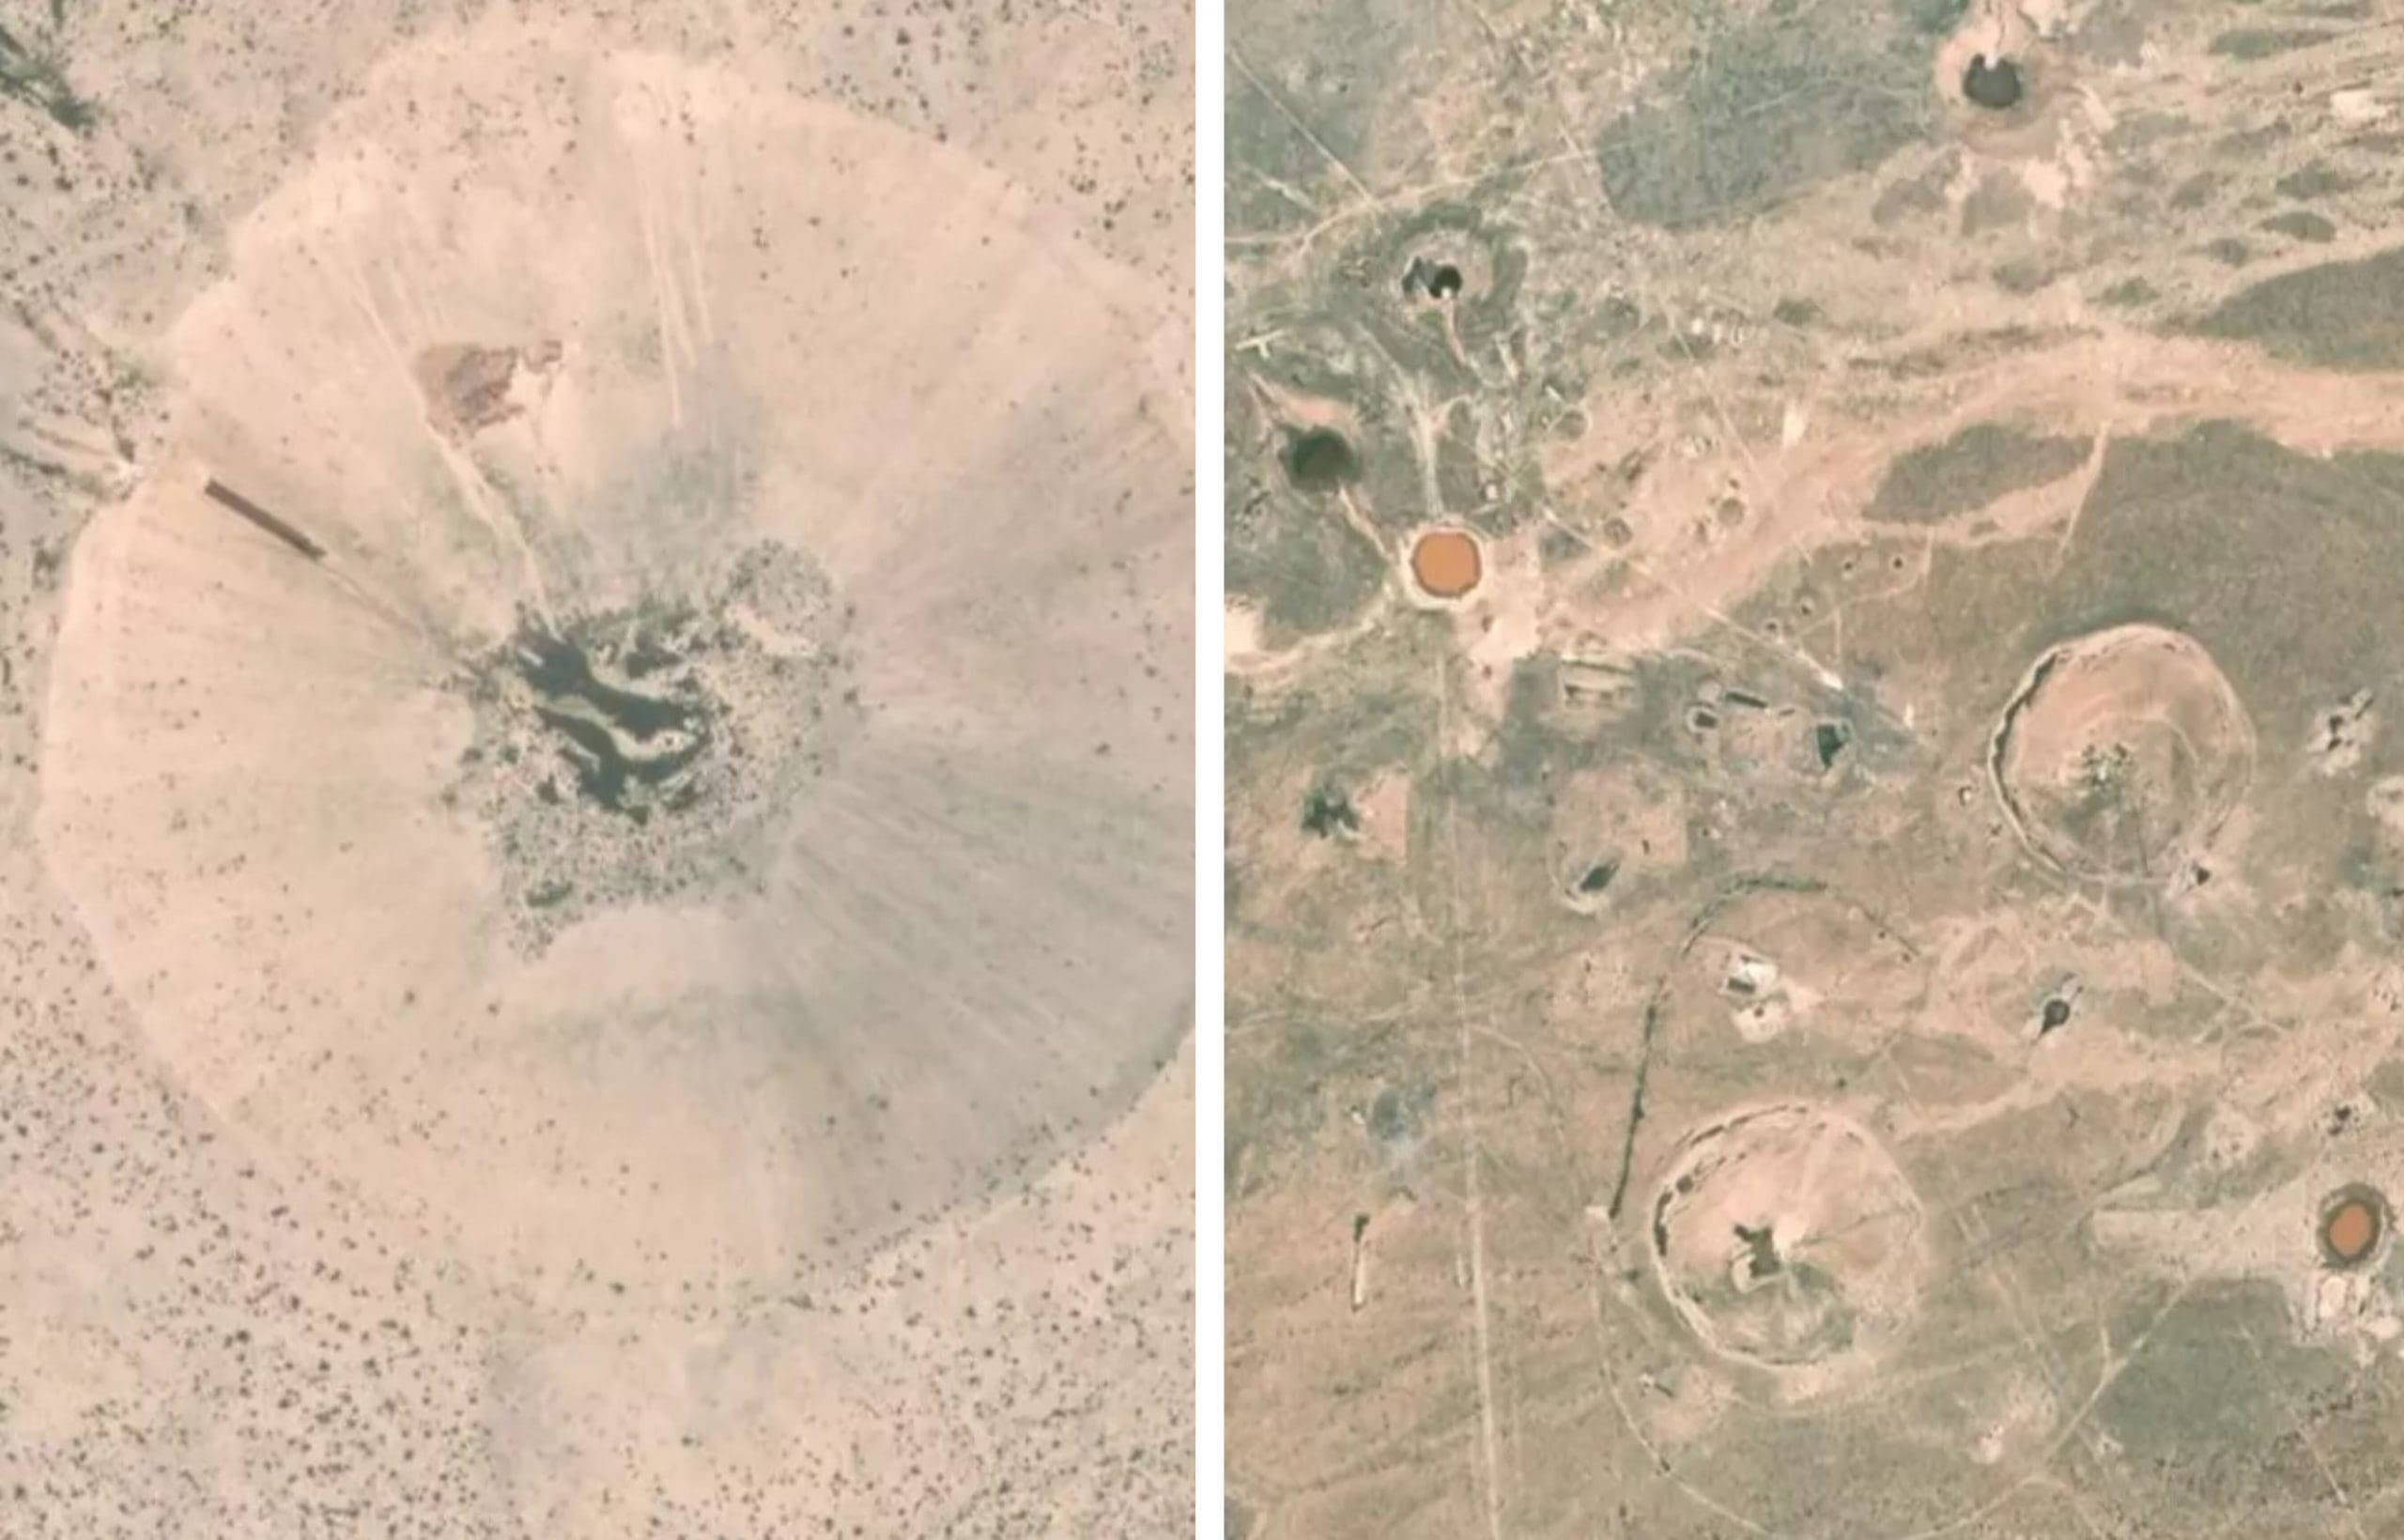 Man Claims Finding Shocking Discovery in Area 51 Using Google Maps